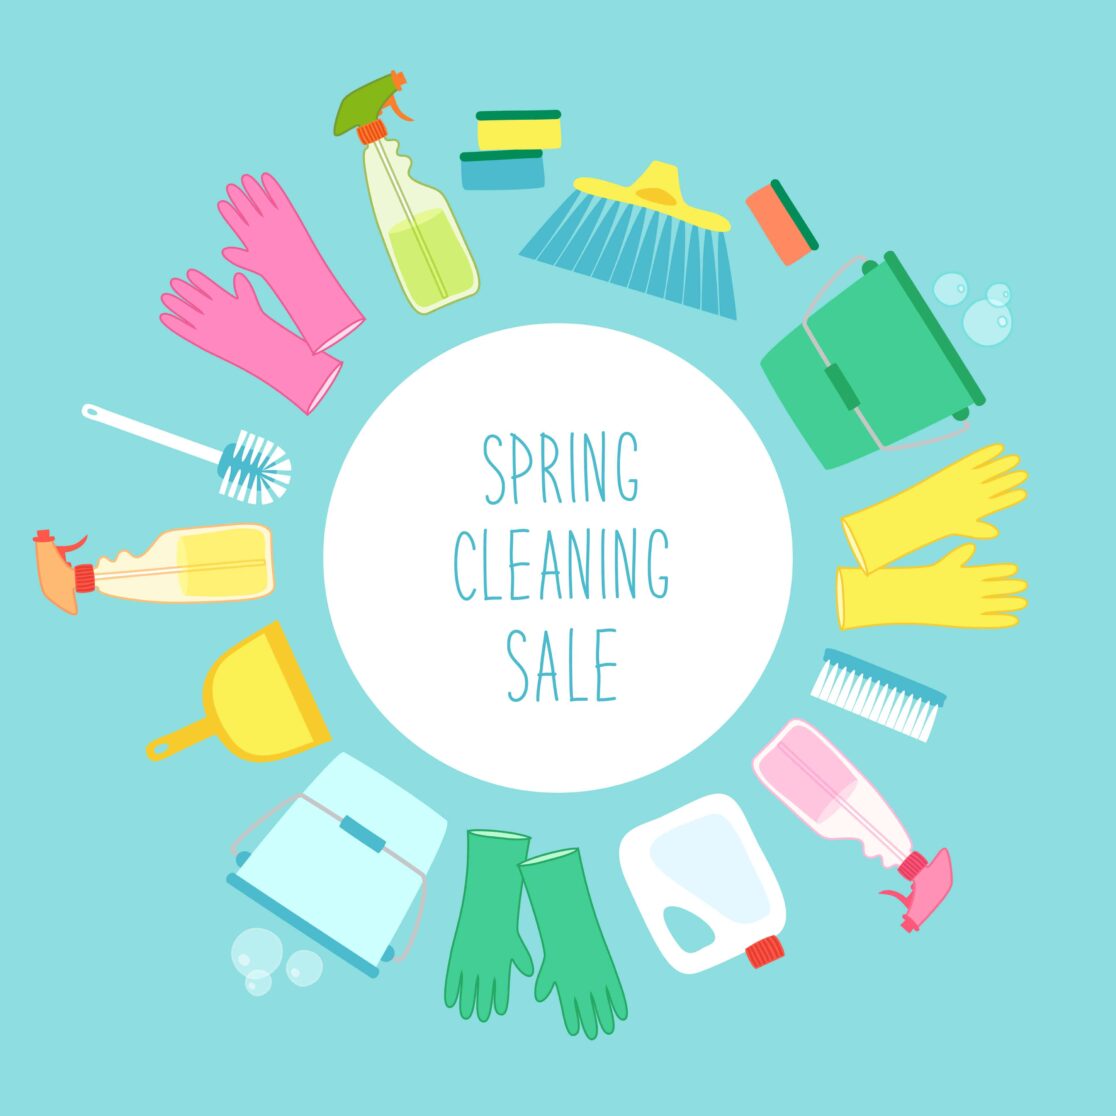 Running a spring cleaning sale